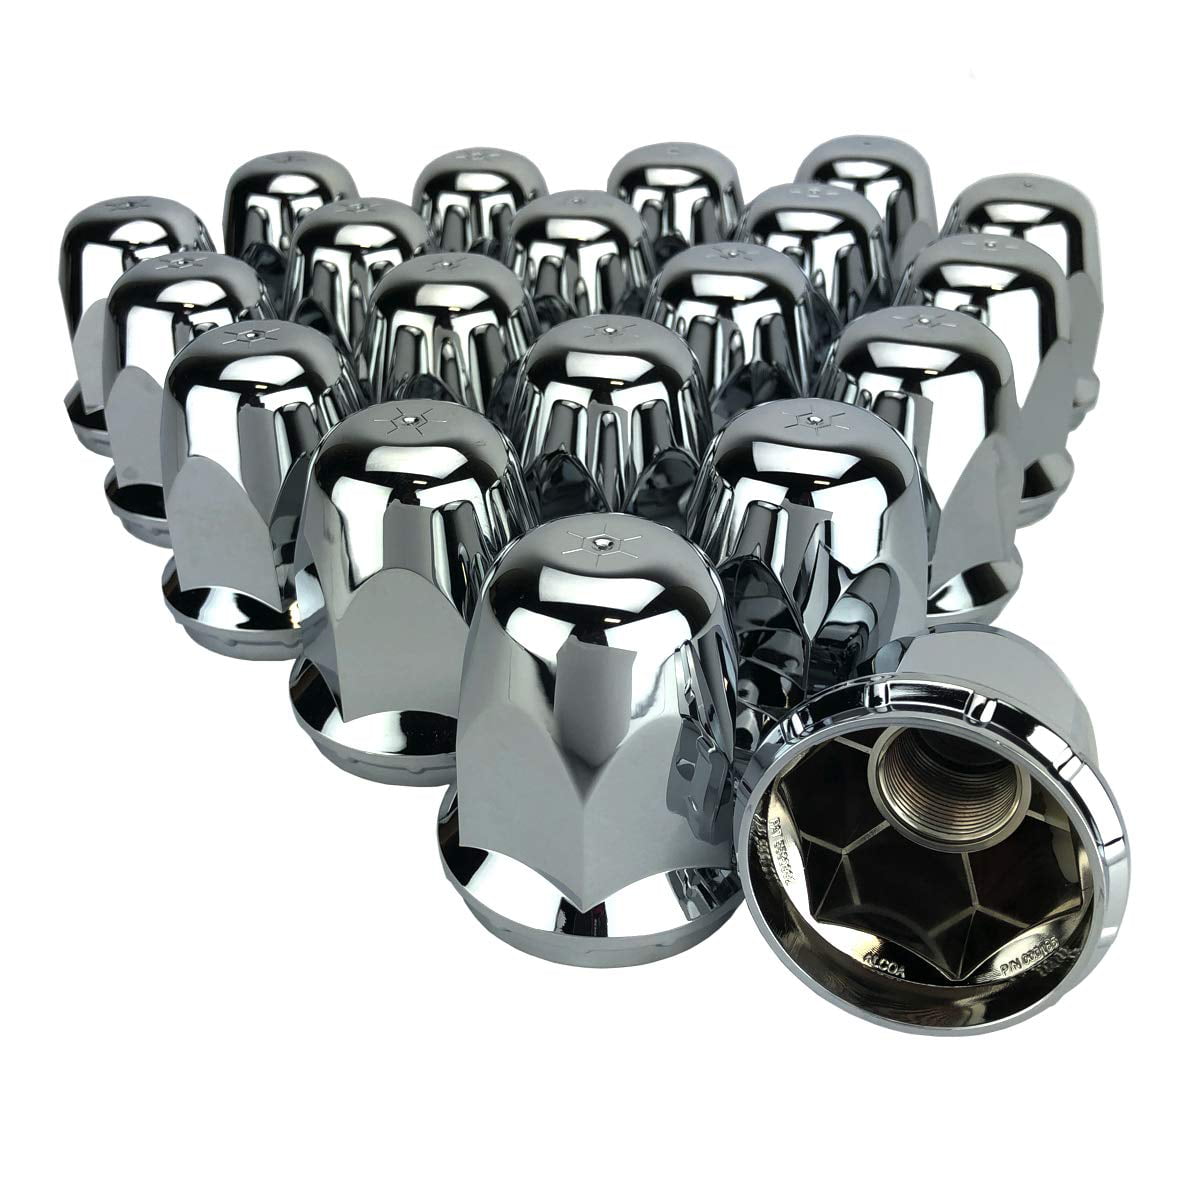 Chrome Lug Nut Covers with Flanges for 33mm Lugs Trucks Trailers Use 60pcs